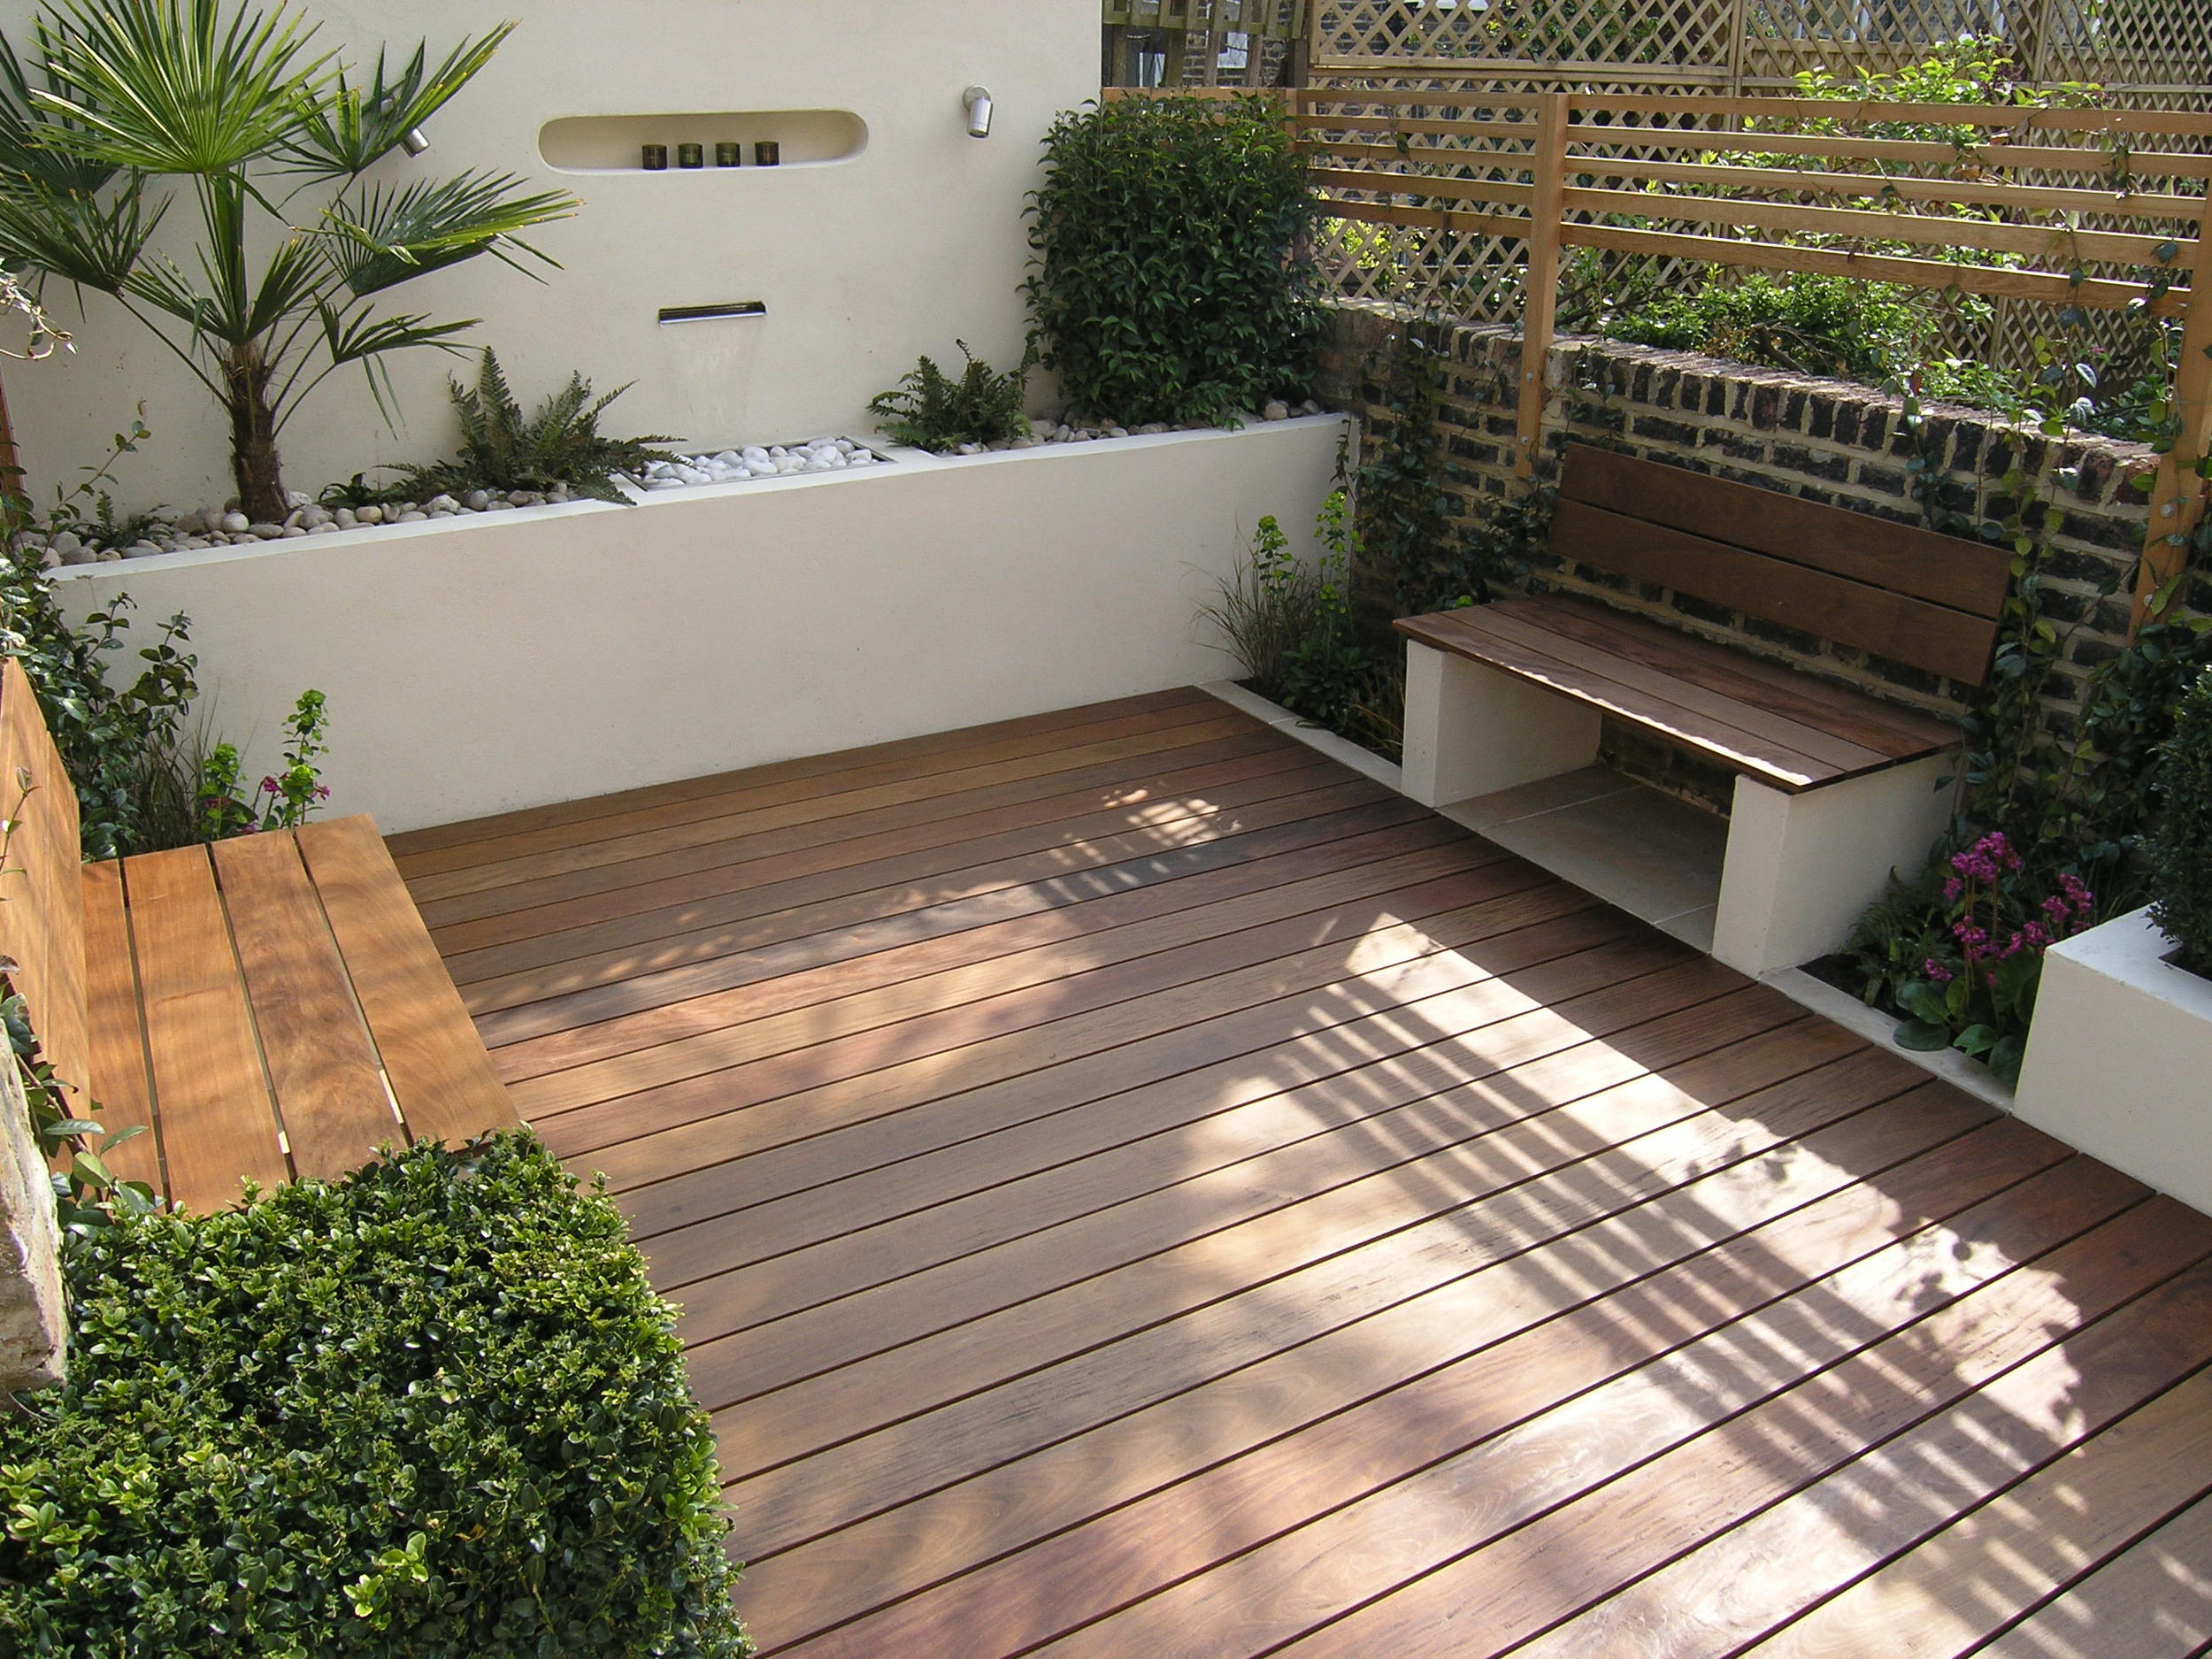 North London small garden makeover with plants and decking